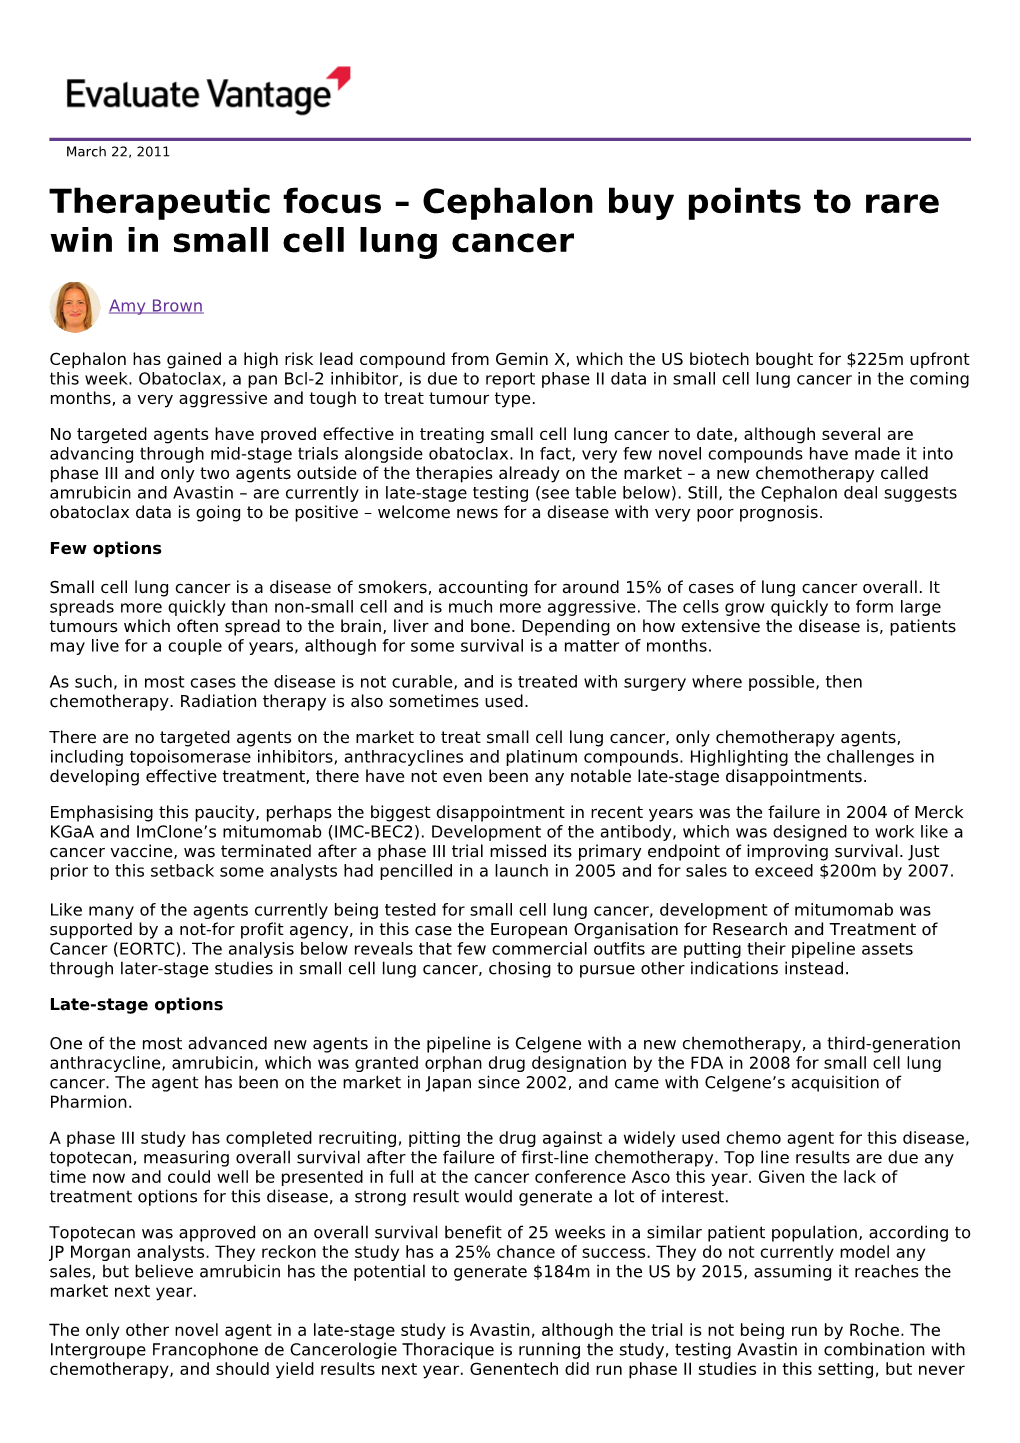 Cephalon Buy Points to Rare Win in Small Cell Lung Cancer